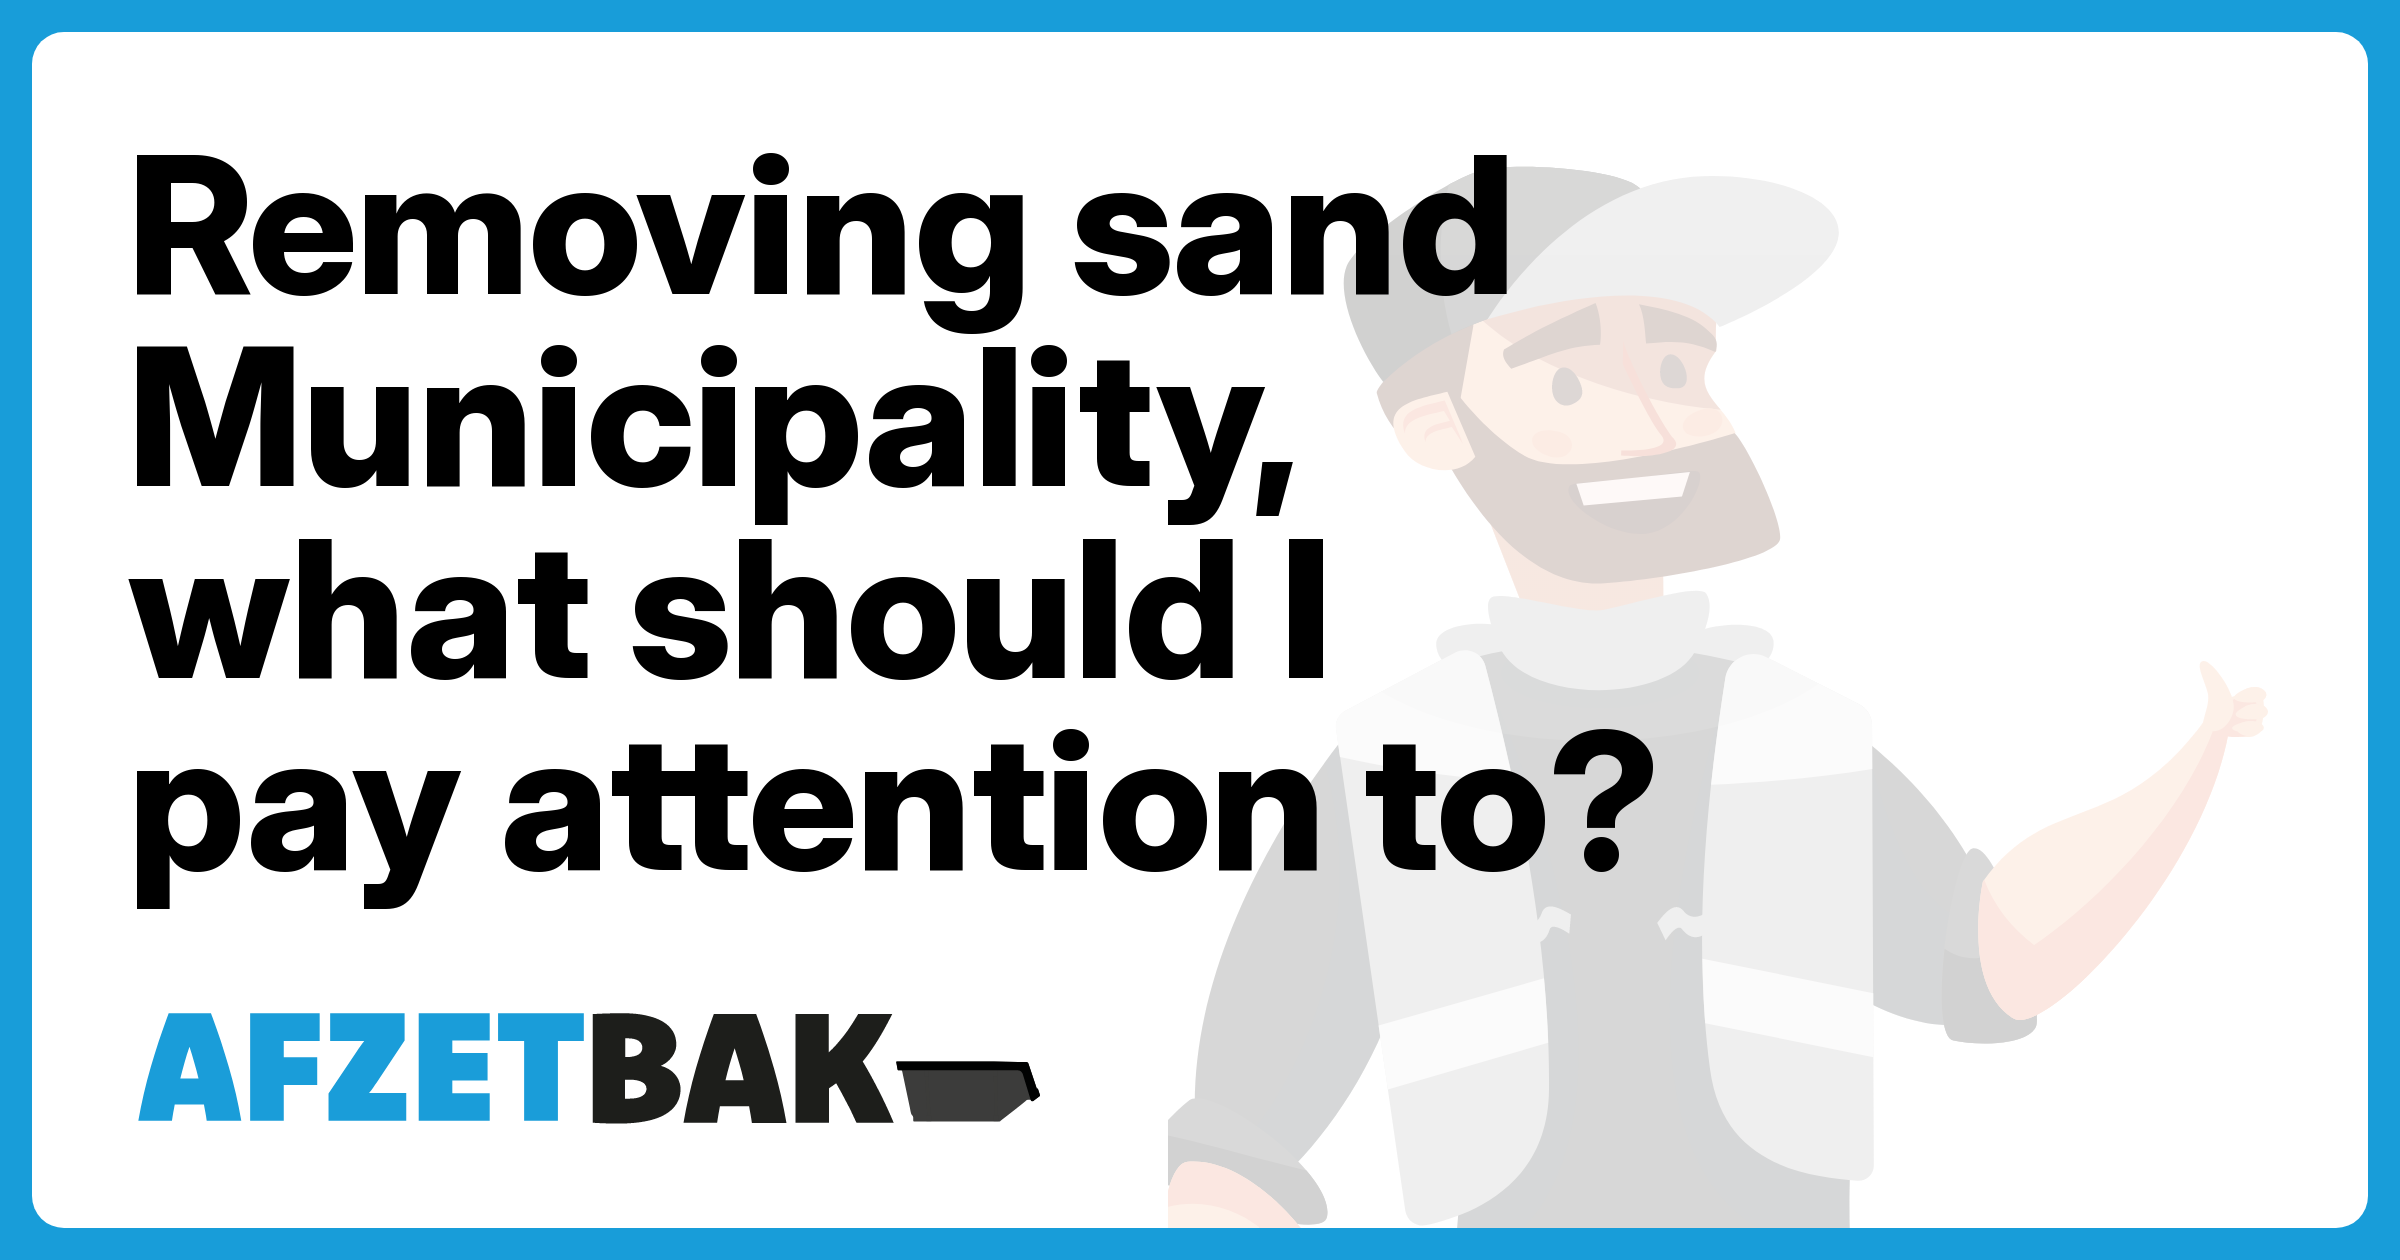 Removing sand Municipality, what should I pay attention to? - Afzetbak.nl